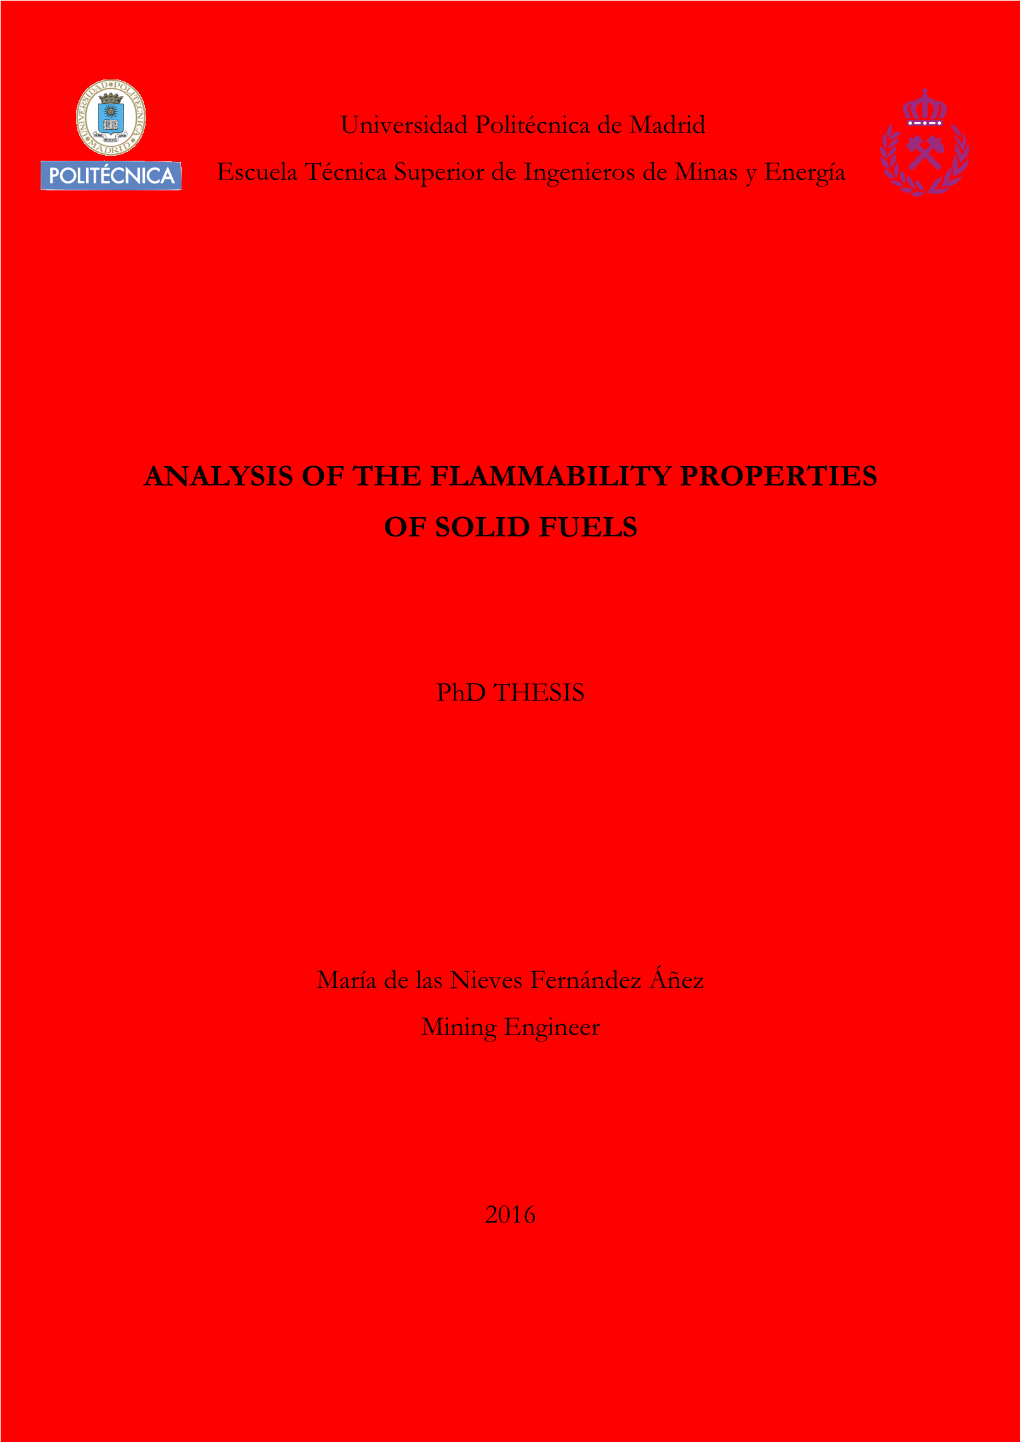 Analysis of the Flammability Properties of Solid Fuels